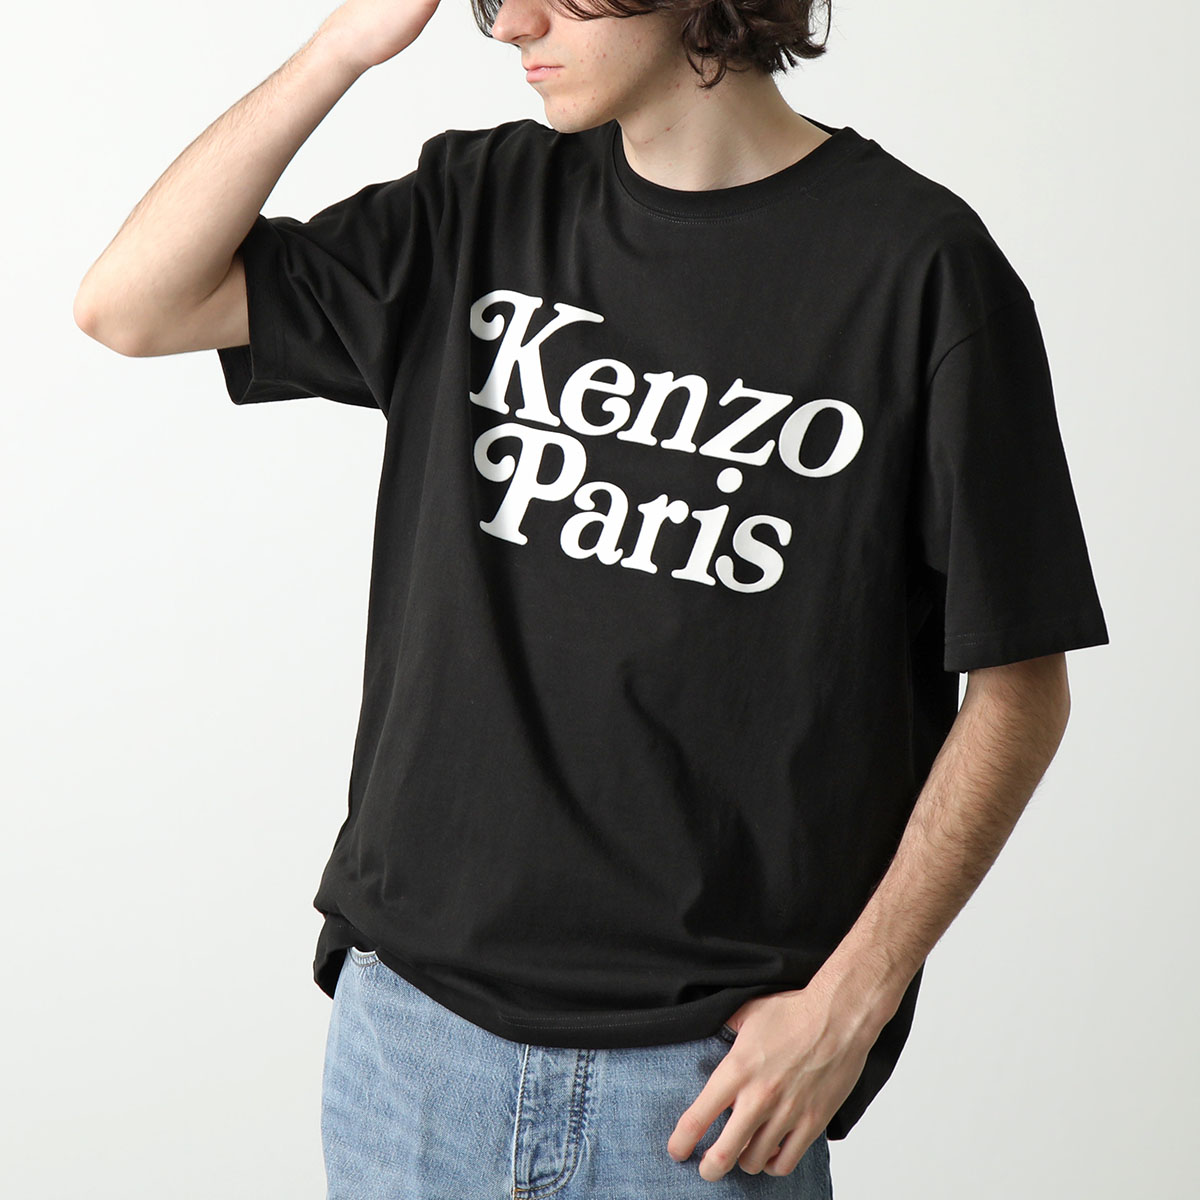 KENZO ケンゾー 半袖 Tシャツ KENZO BY VERDY OVERSIZE T PFE55TS1914SY メンズ ロゴ コットン クルーネック カラー2色｜s-musee｜02